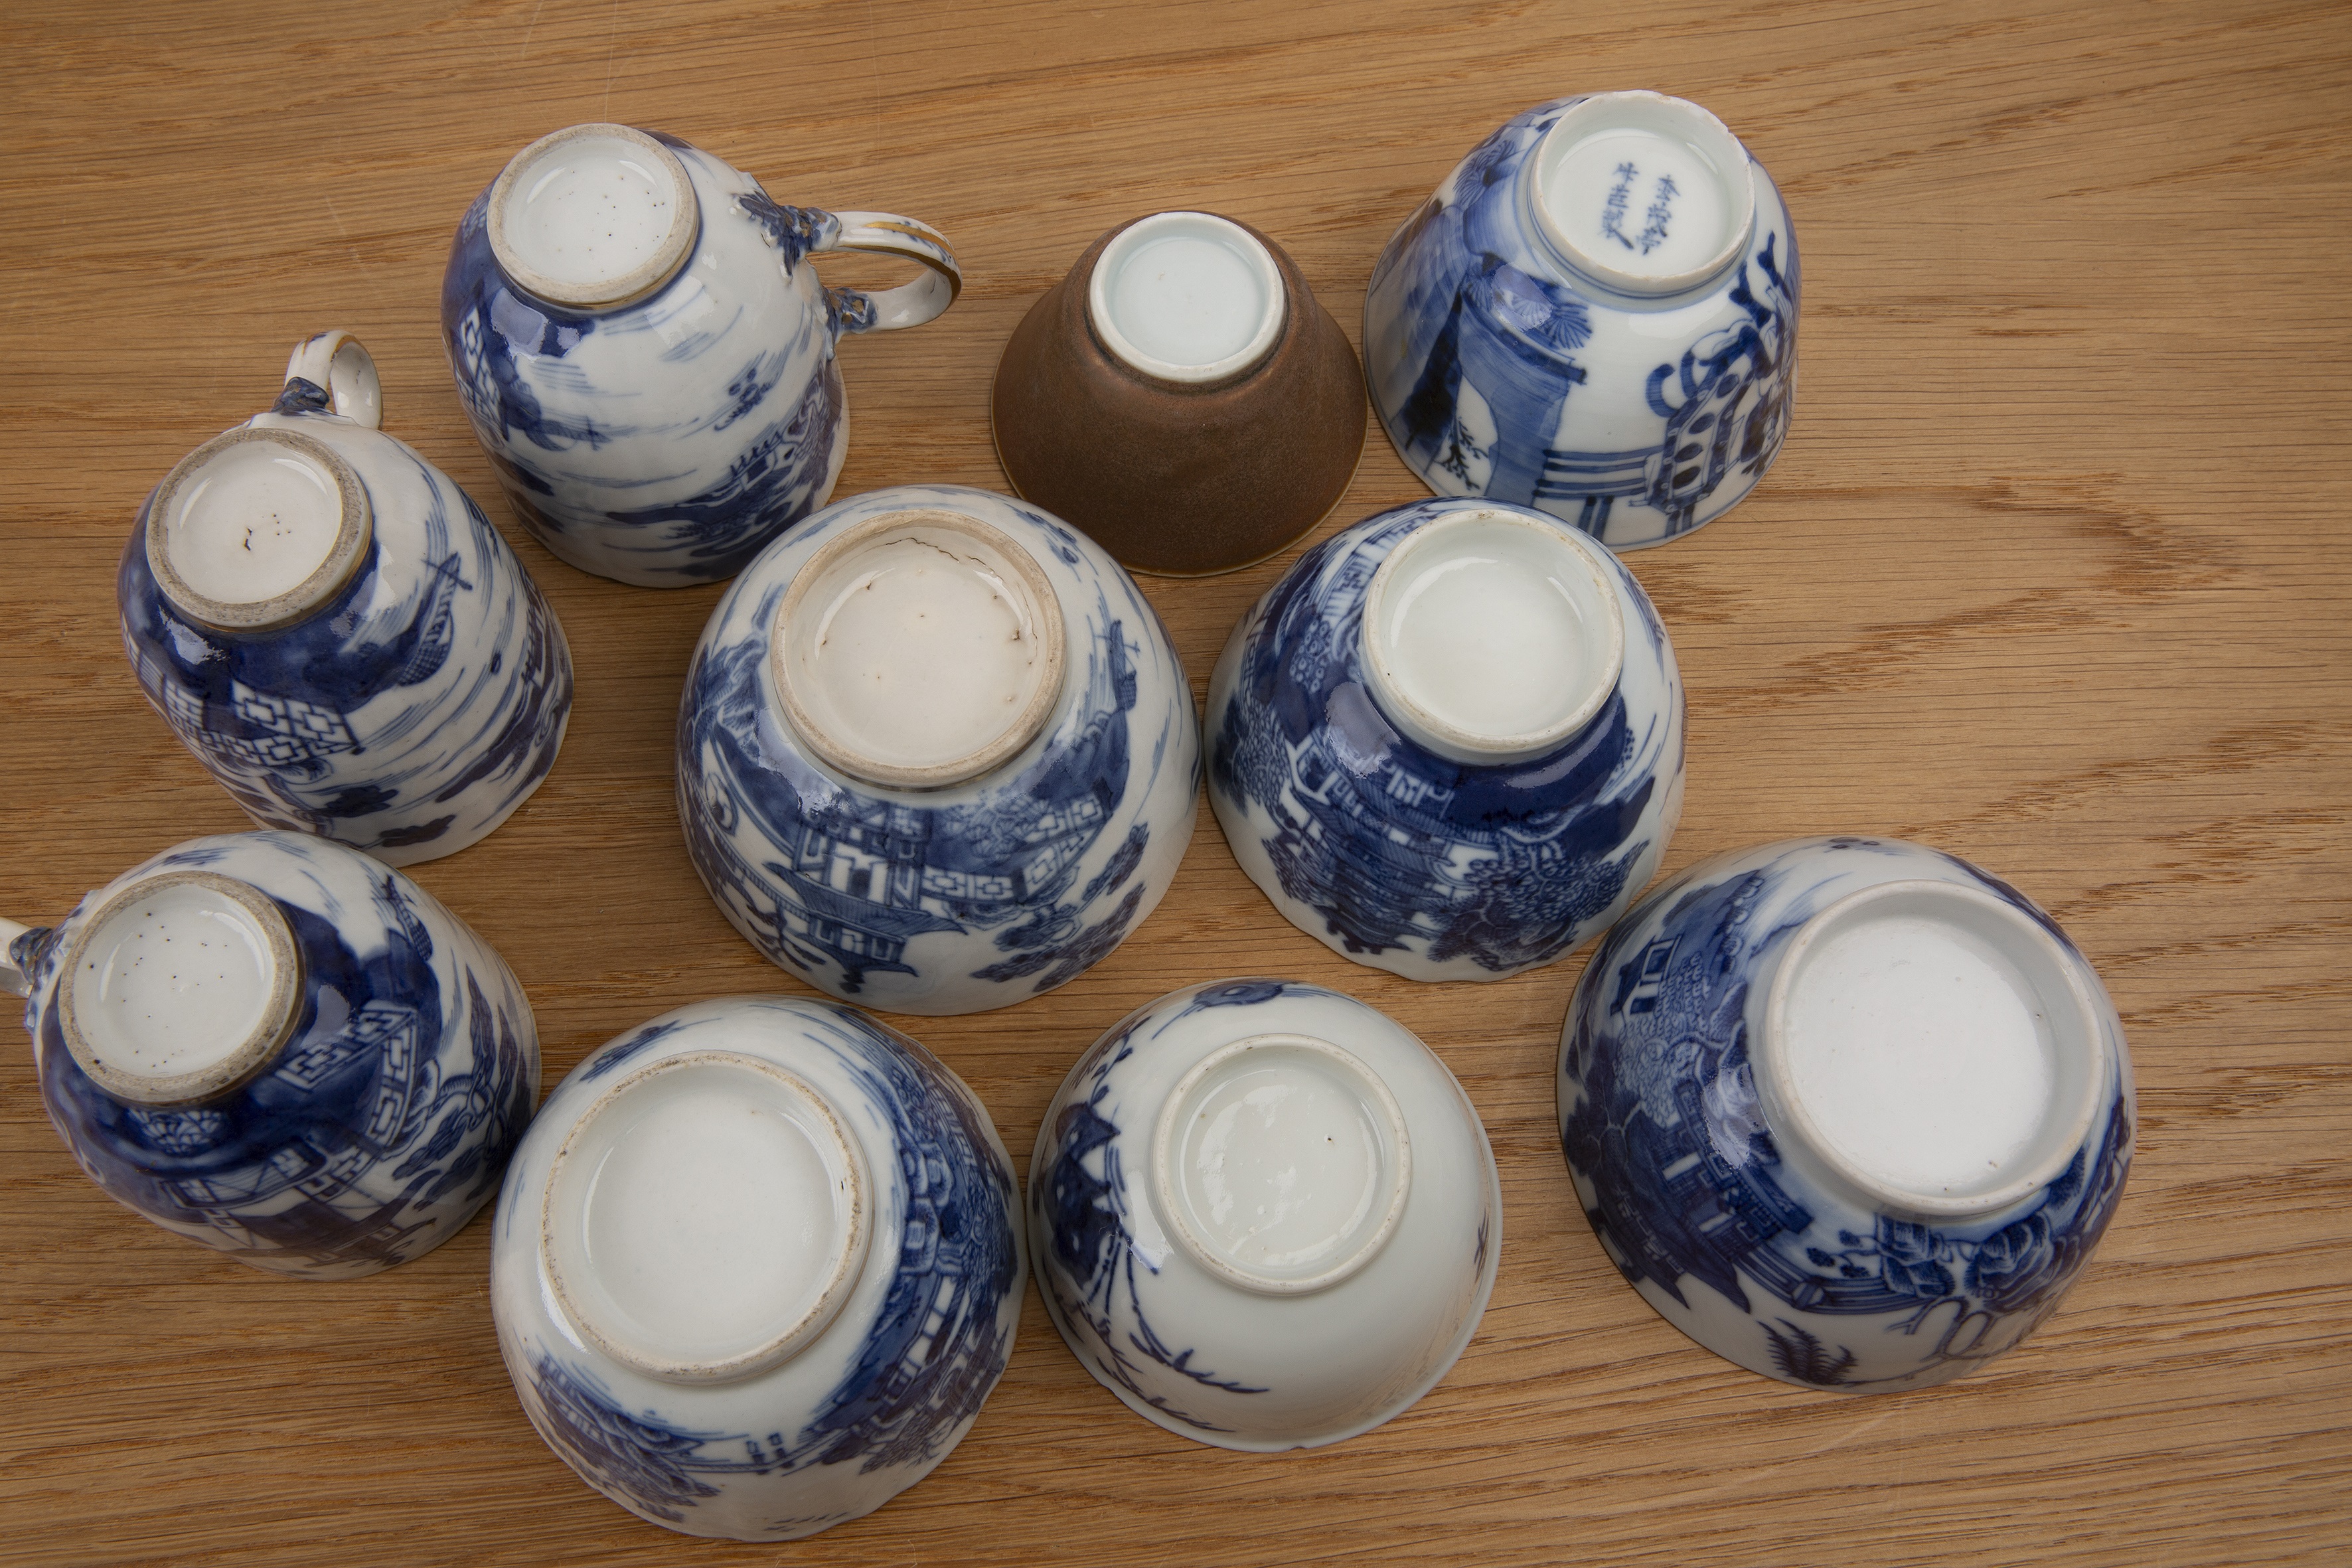 Group of various tea bowls, saucers and cups Chinese, 18th/19th Century including Nanking, Export - Image 4 of 8